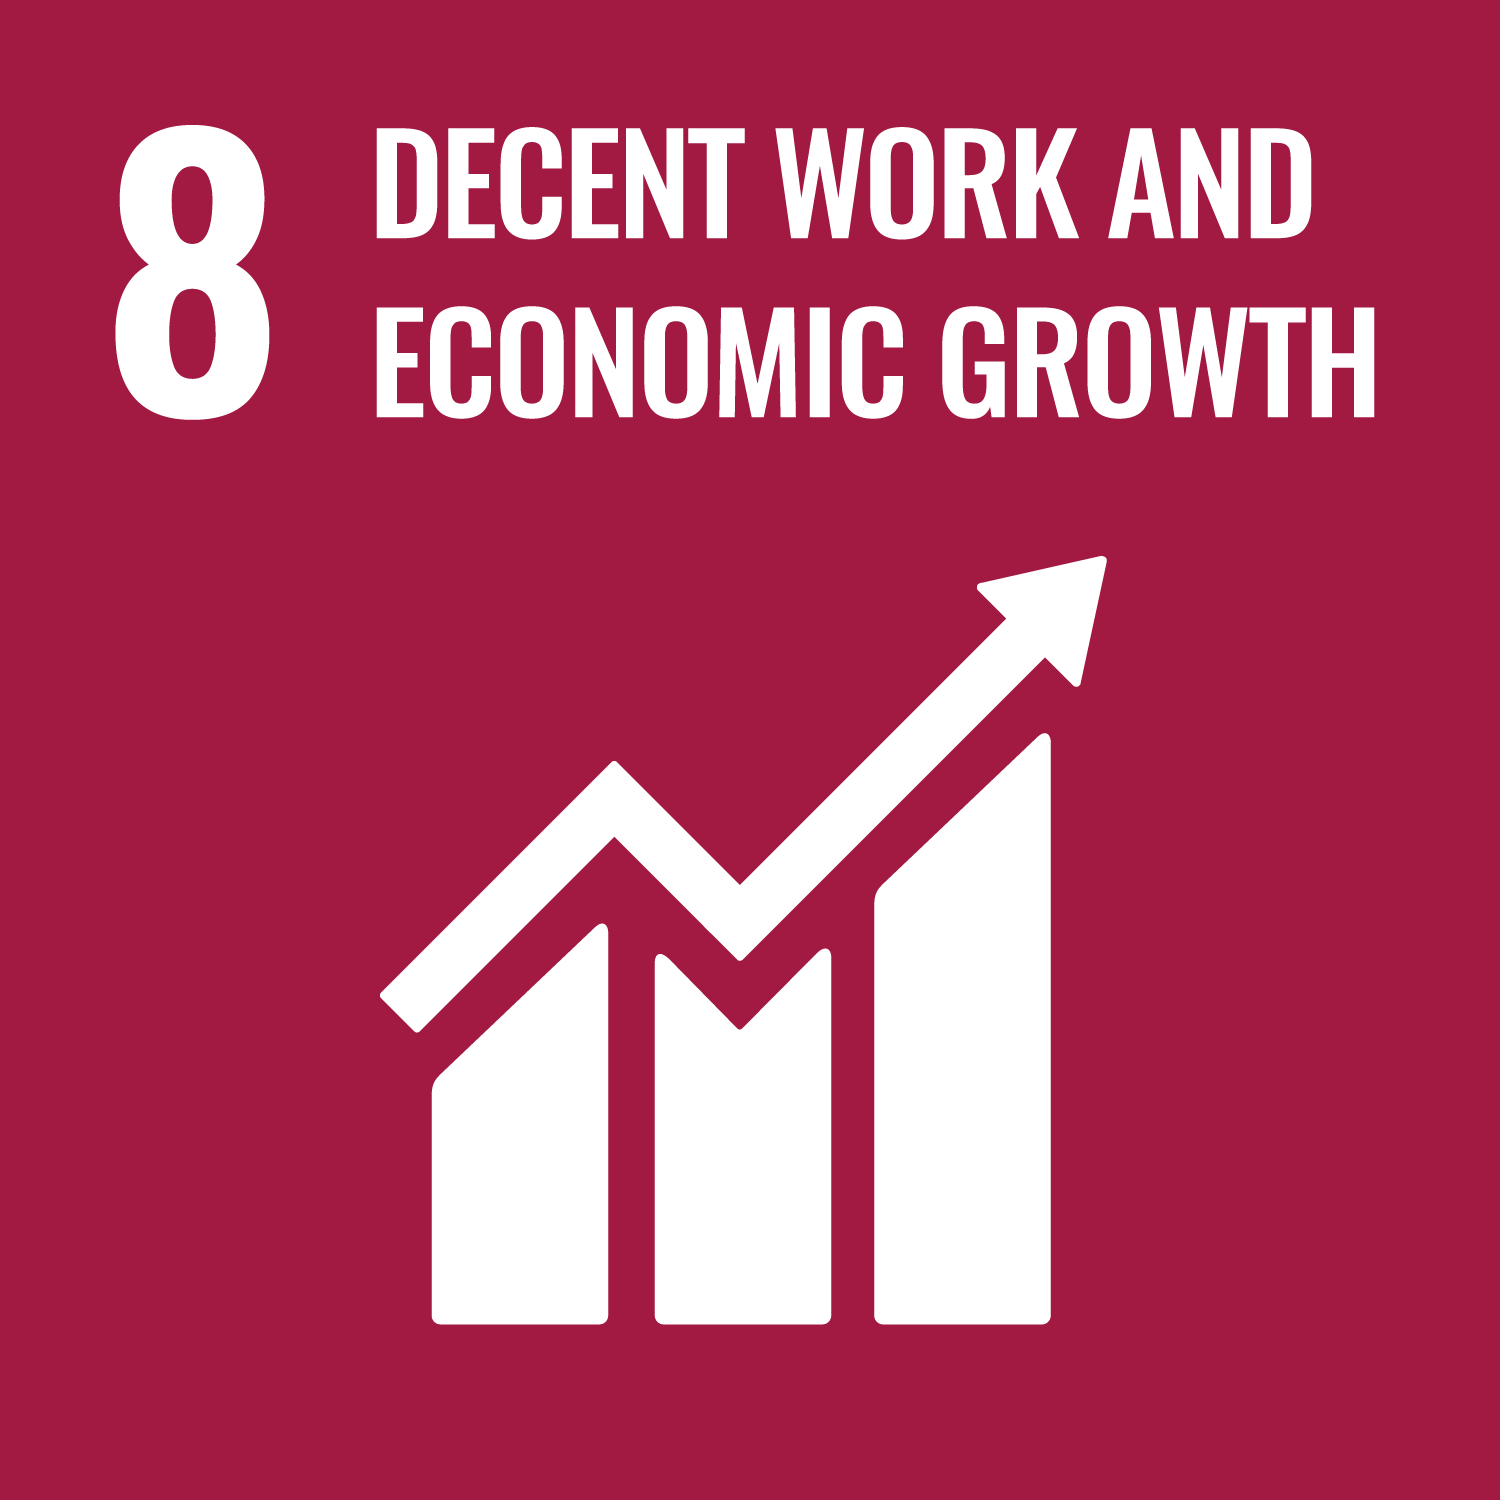 Related UN Sustainable Development Goals icon 4